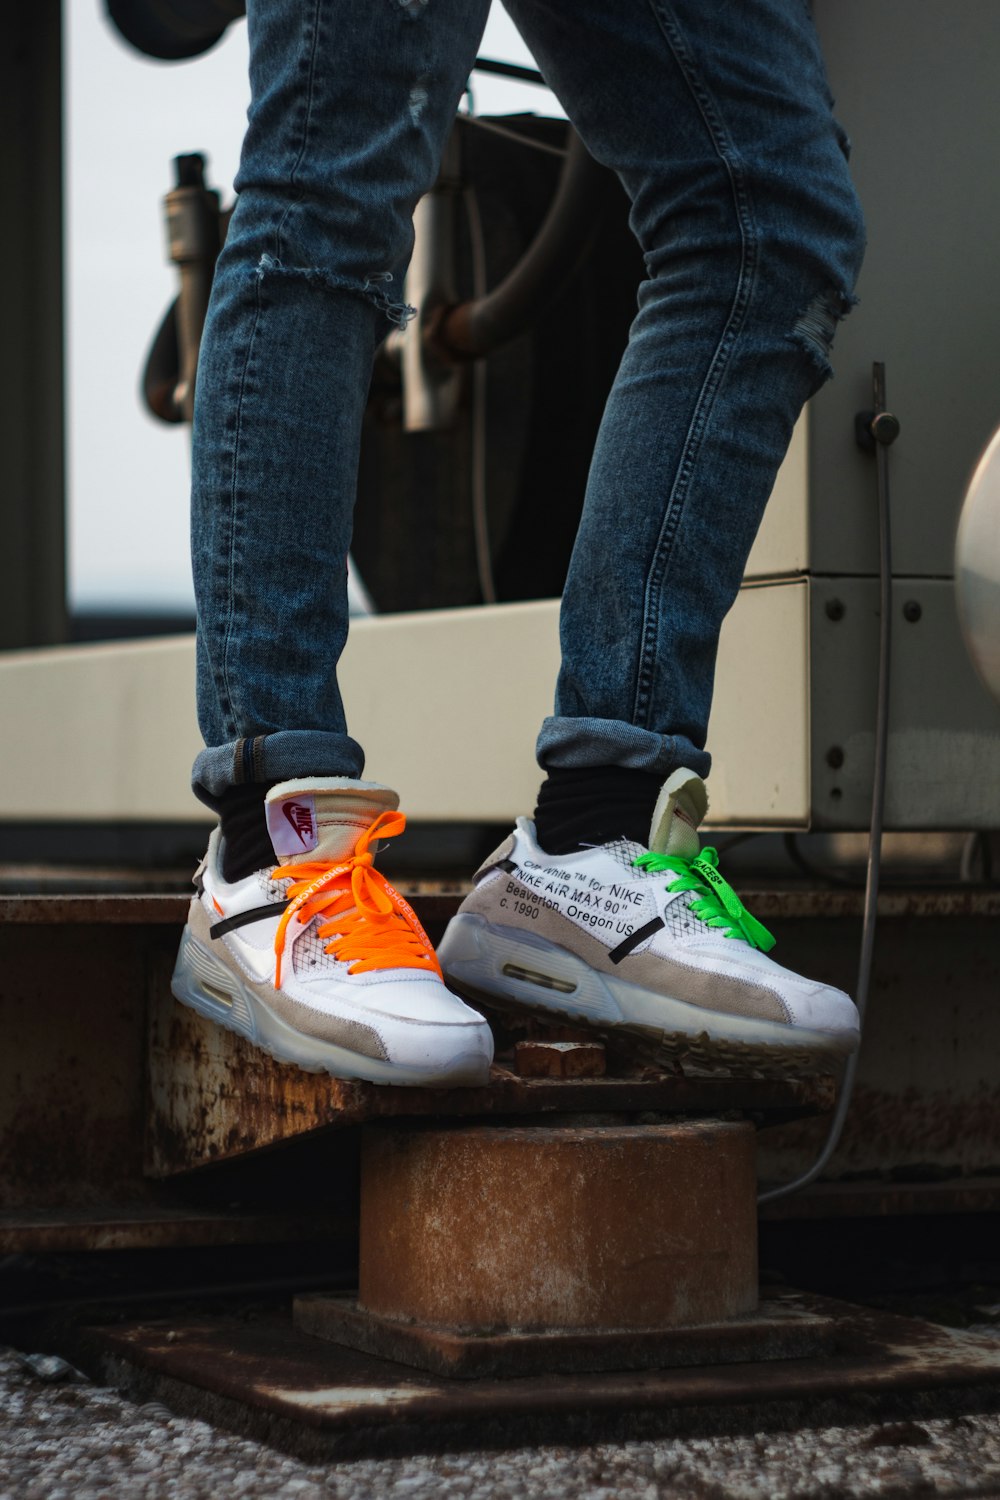 person wearing blue denim jeans and white and orange nike athletic shoes  photo – Free Nike shoes Image on Unsplash